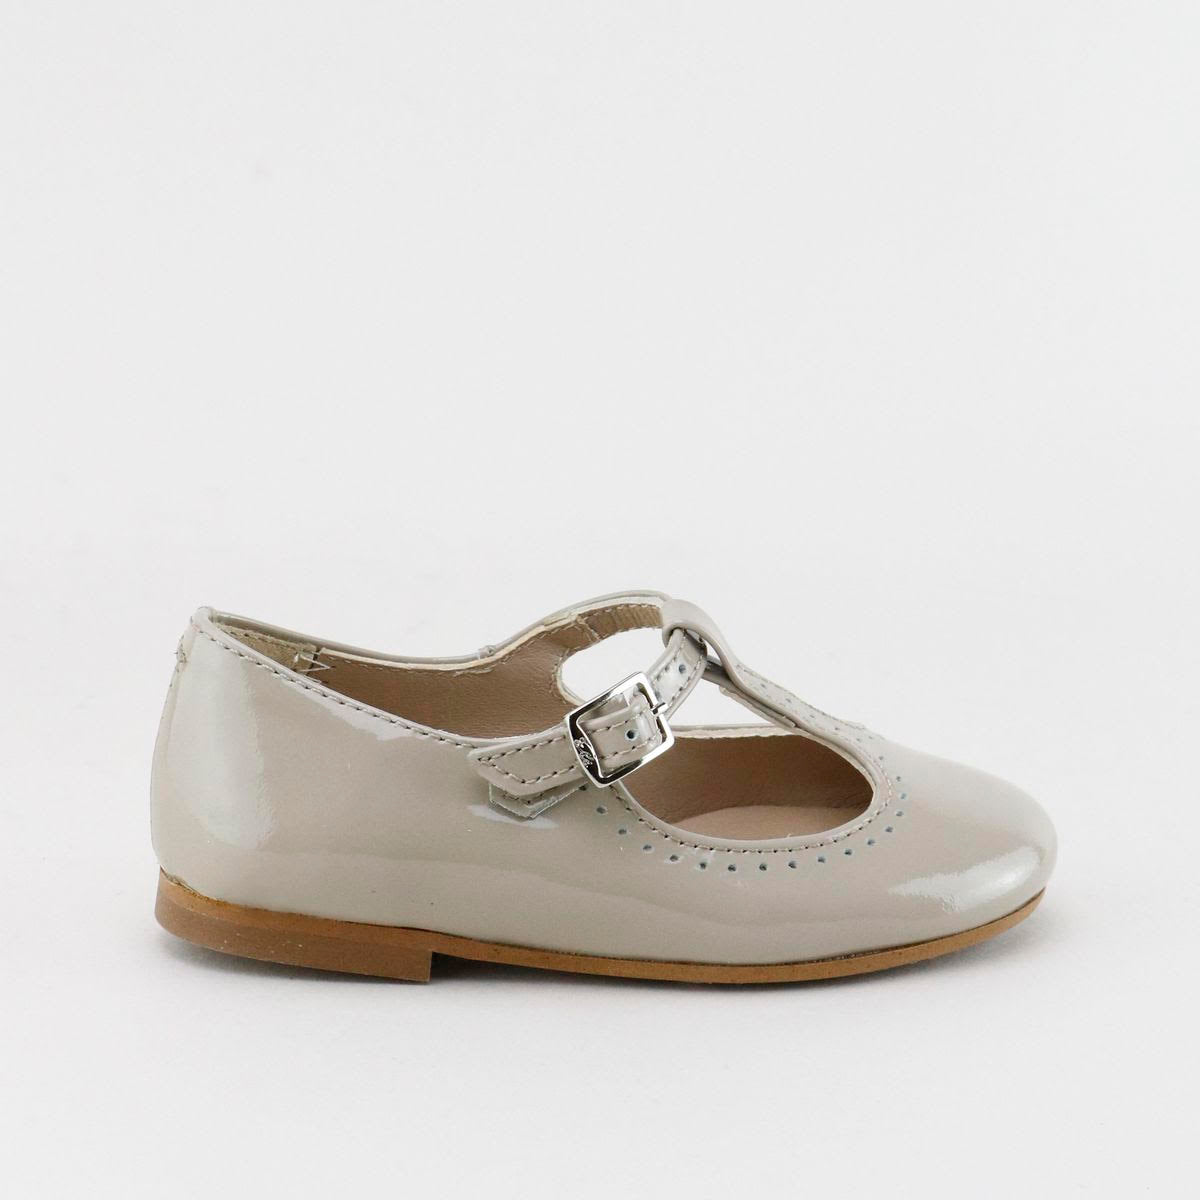 PAPANATAS TAUPE PATENT LEATHER ROUNDED T-STRAP SHOE